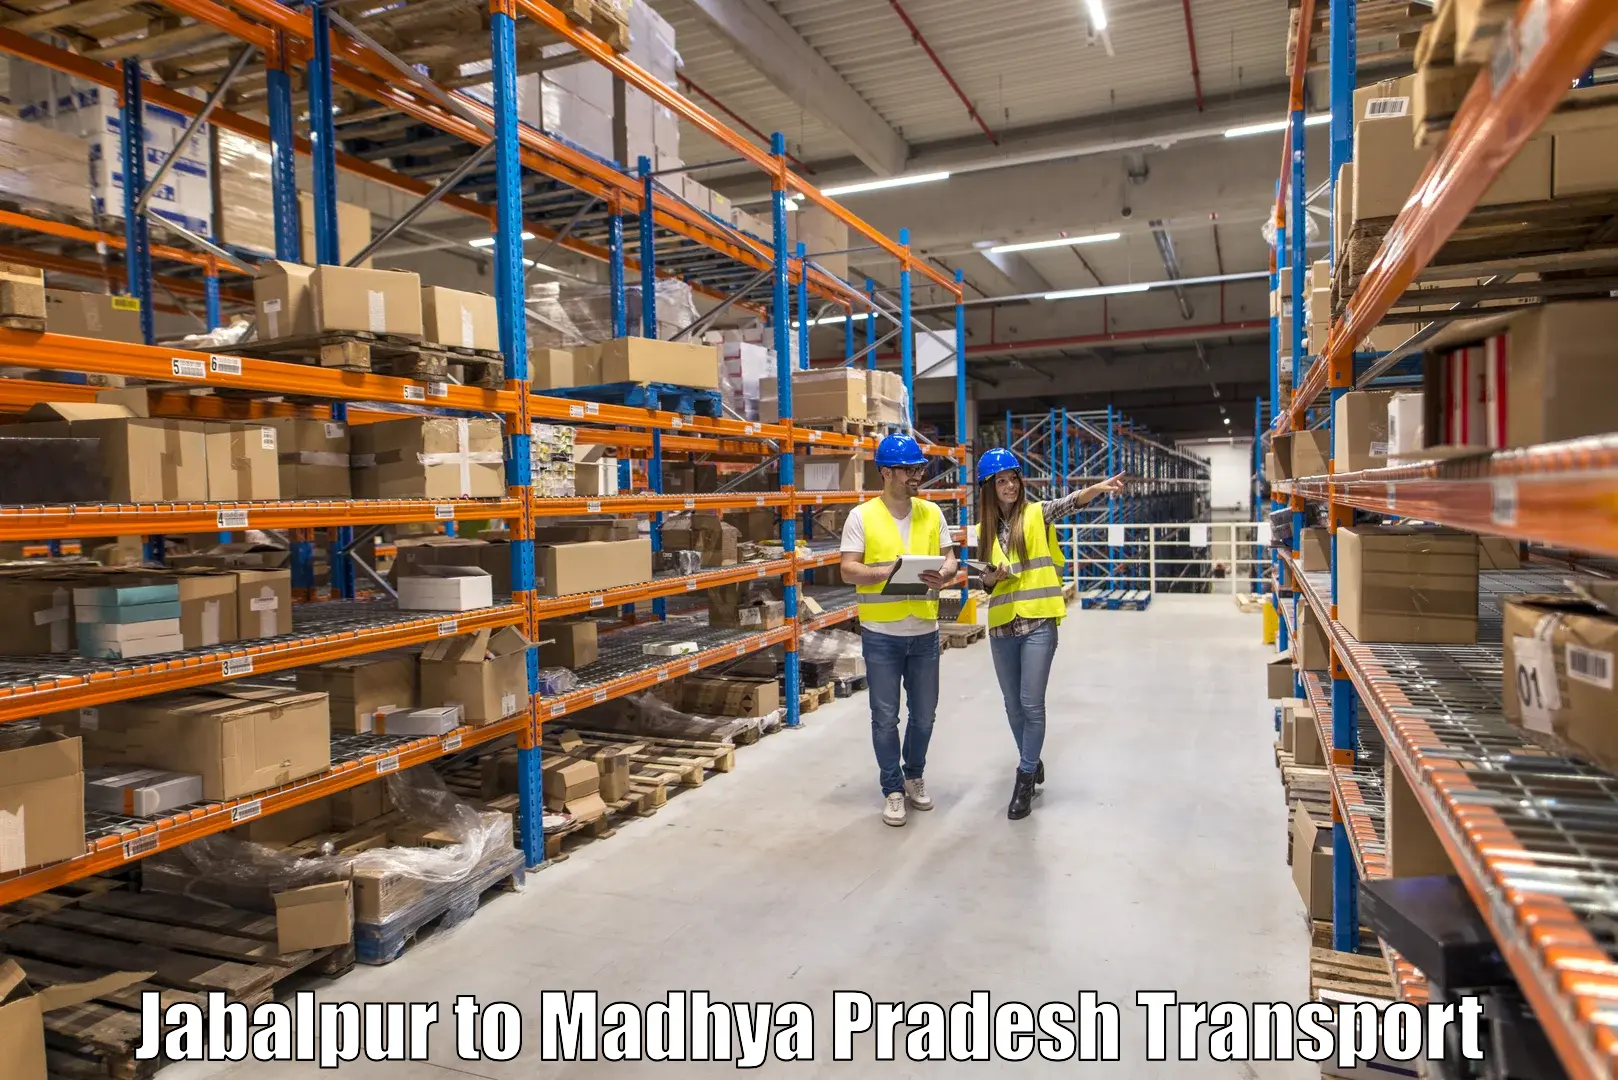 Daily parcel service transport Jabalpur to Neemuch